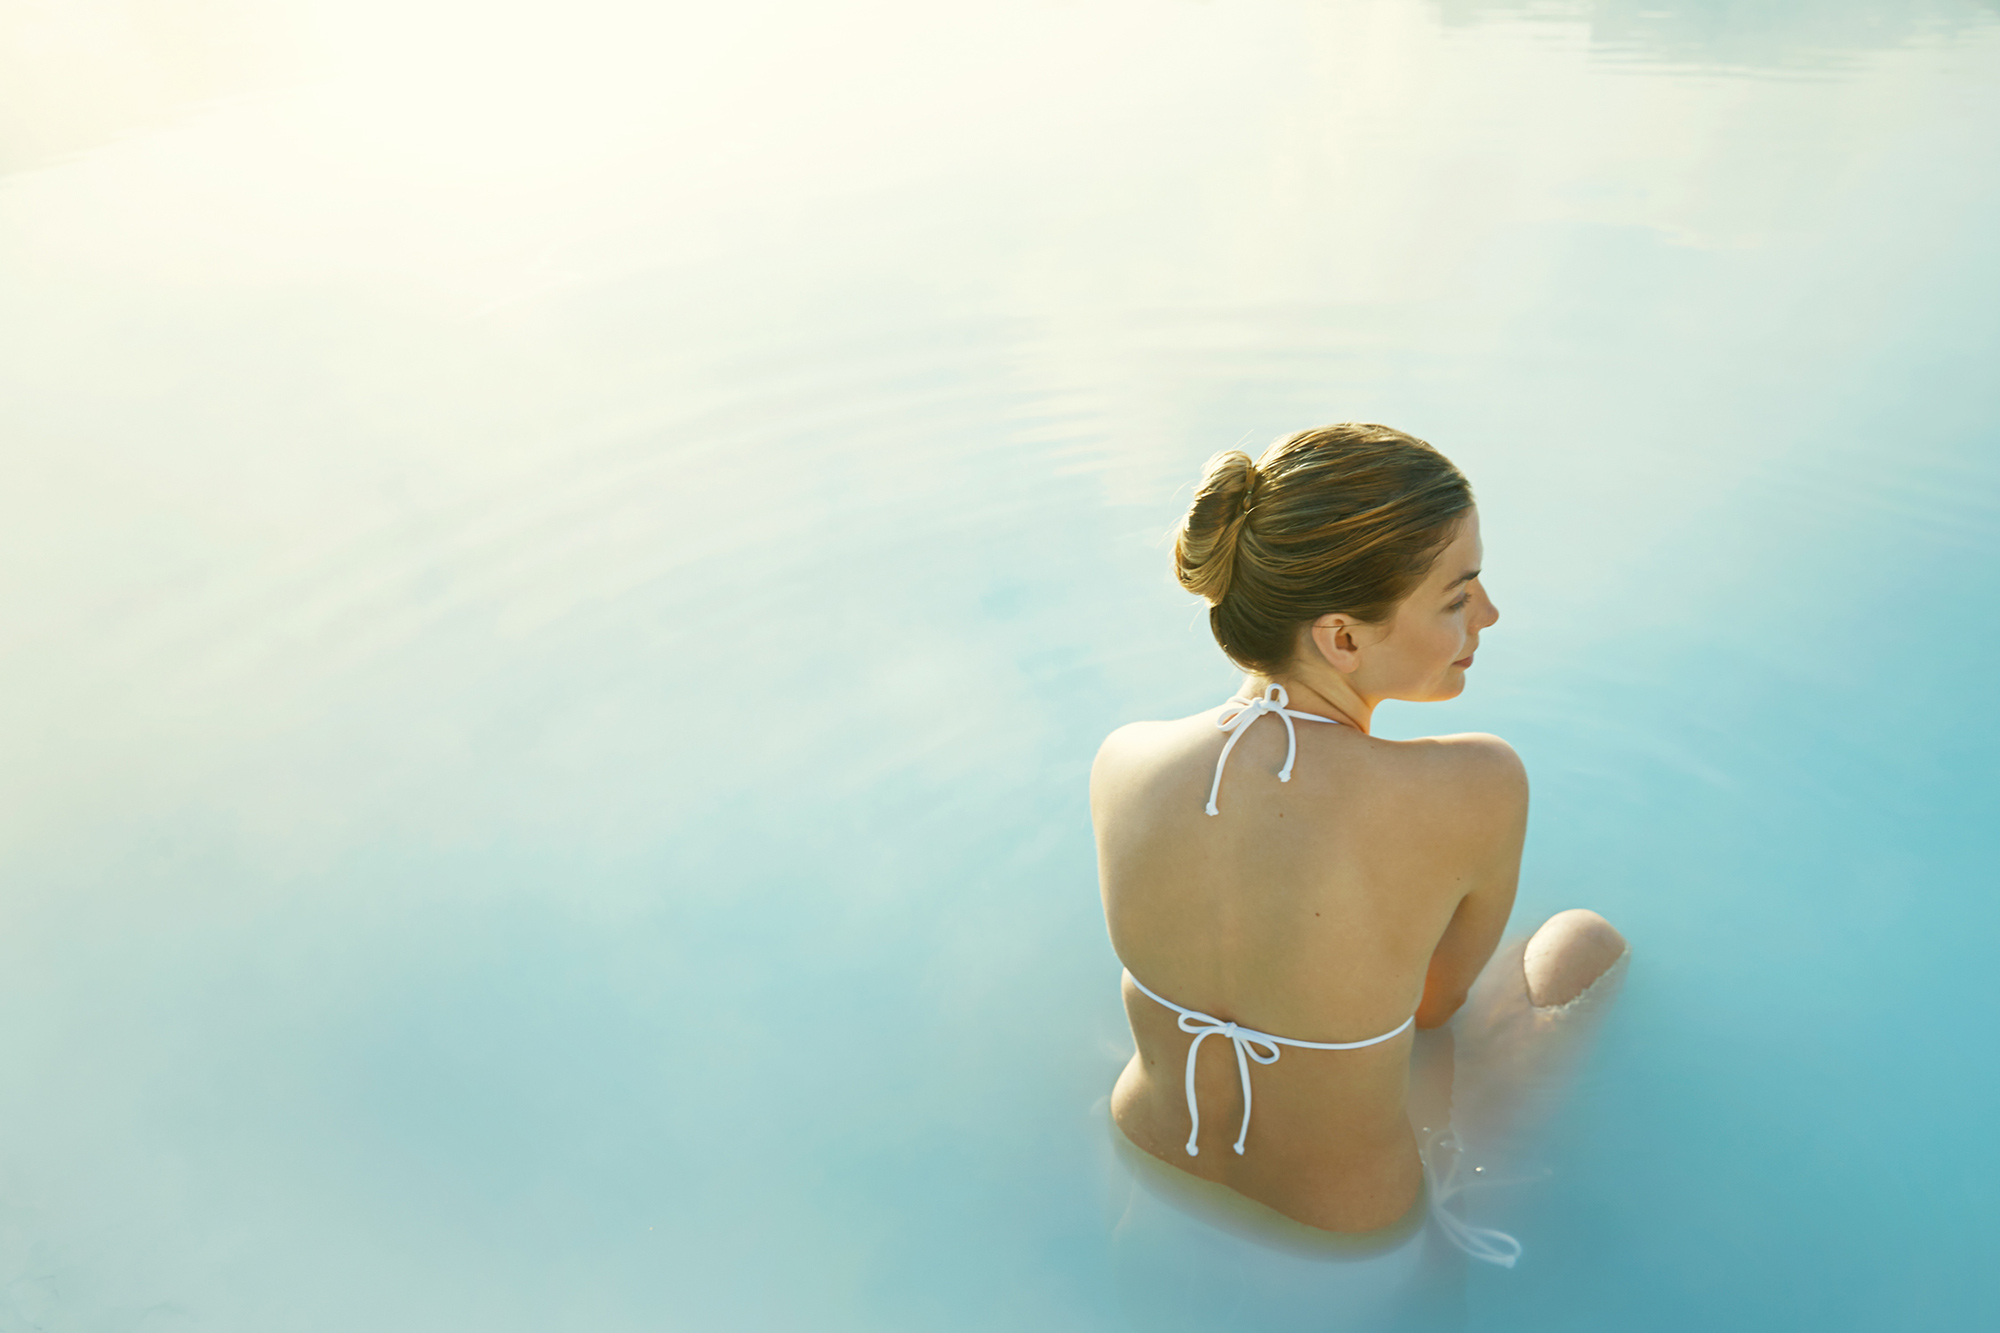 Visiting the Blue Lagoon Geothermal Spa makes for the perfect end to your Iceland adventure.